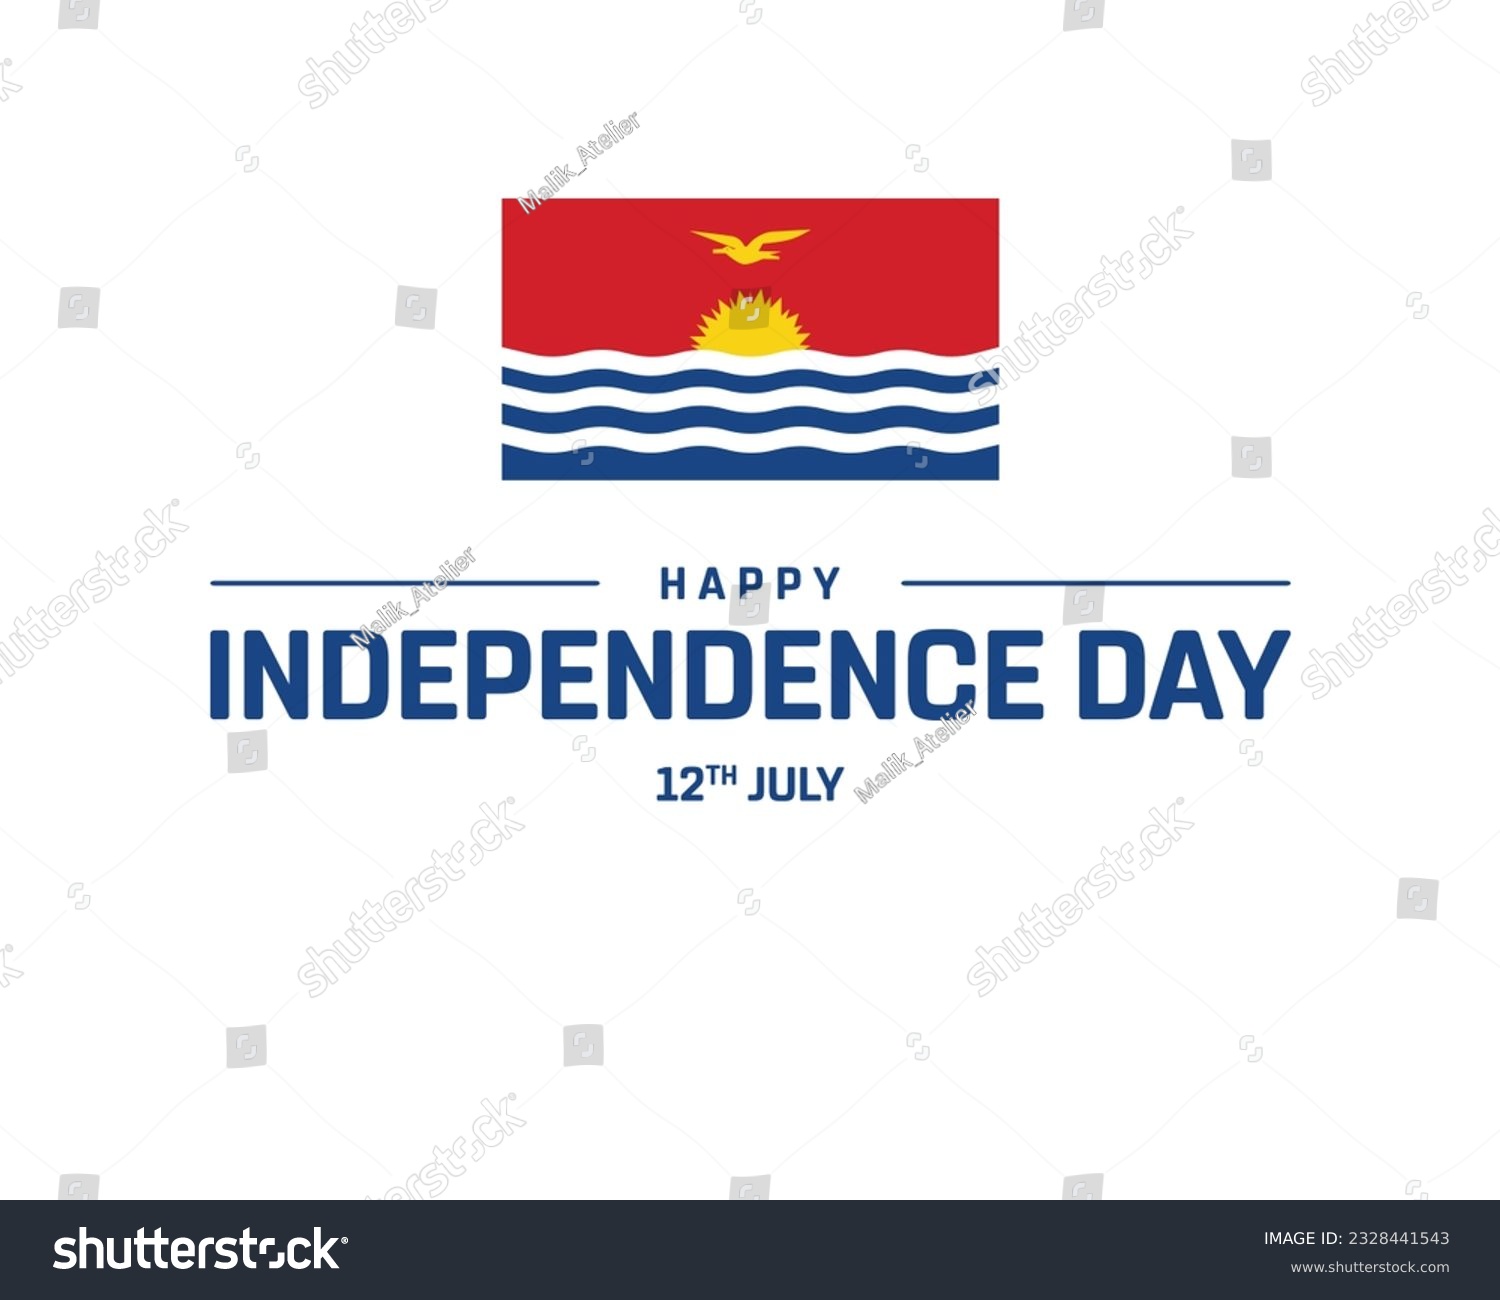 SVG of Happy Independence Day, Kiribati Independence Day, Kiribati, Flag of Kiribati, 12th July, 12 July, National Day, Independence day svg